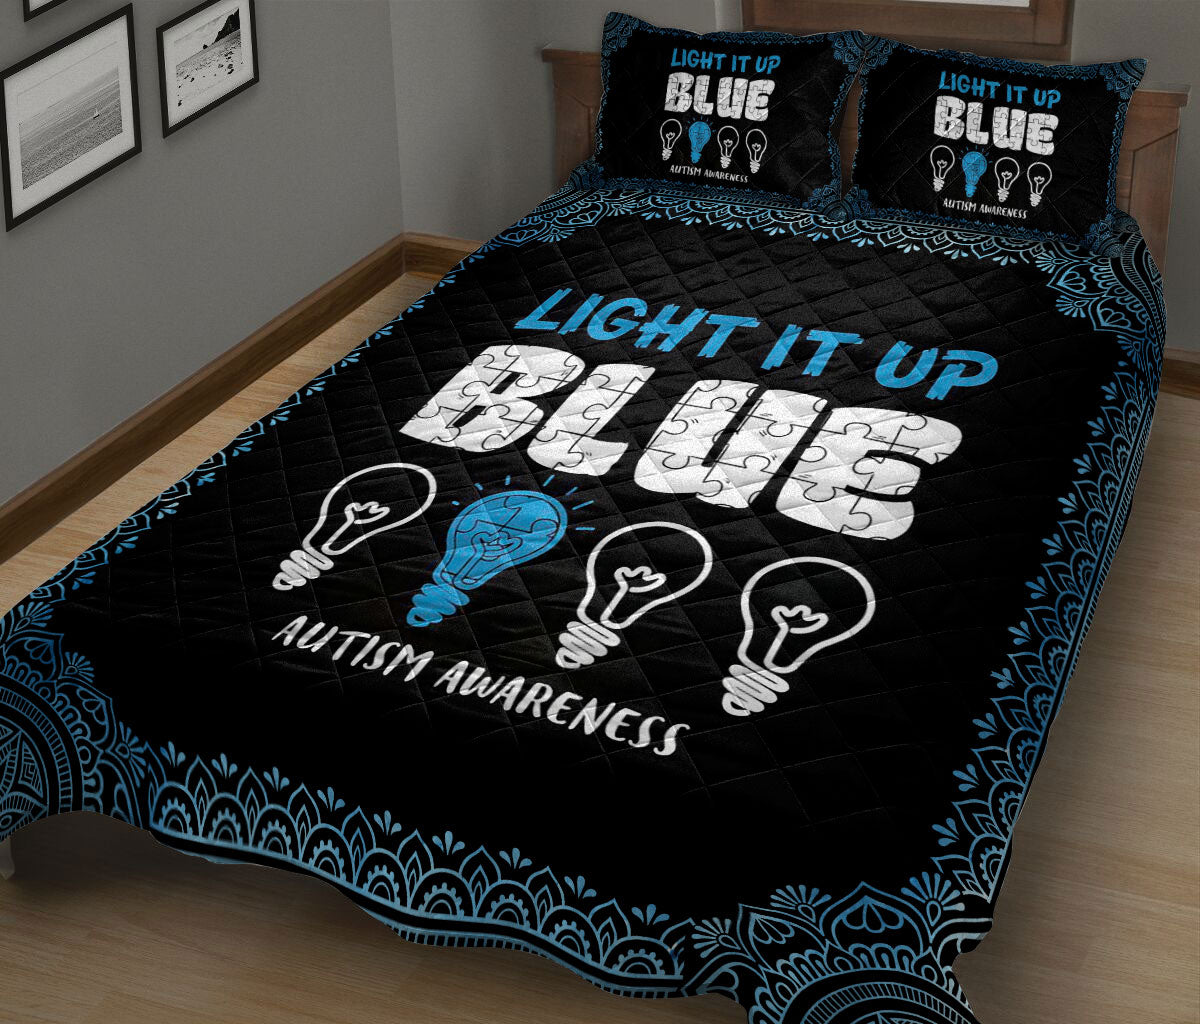 Ohaprints-Quilt-Bed-Set-Pillowcase-Autism-Awareness-Asd-Light-It-Up-Blue-Support-Gift-Blanket-Bedspread-Bedding-1292-King (90'' x 100'')